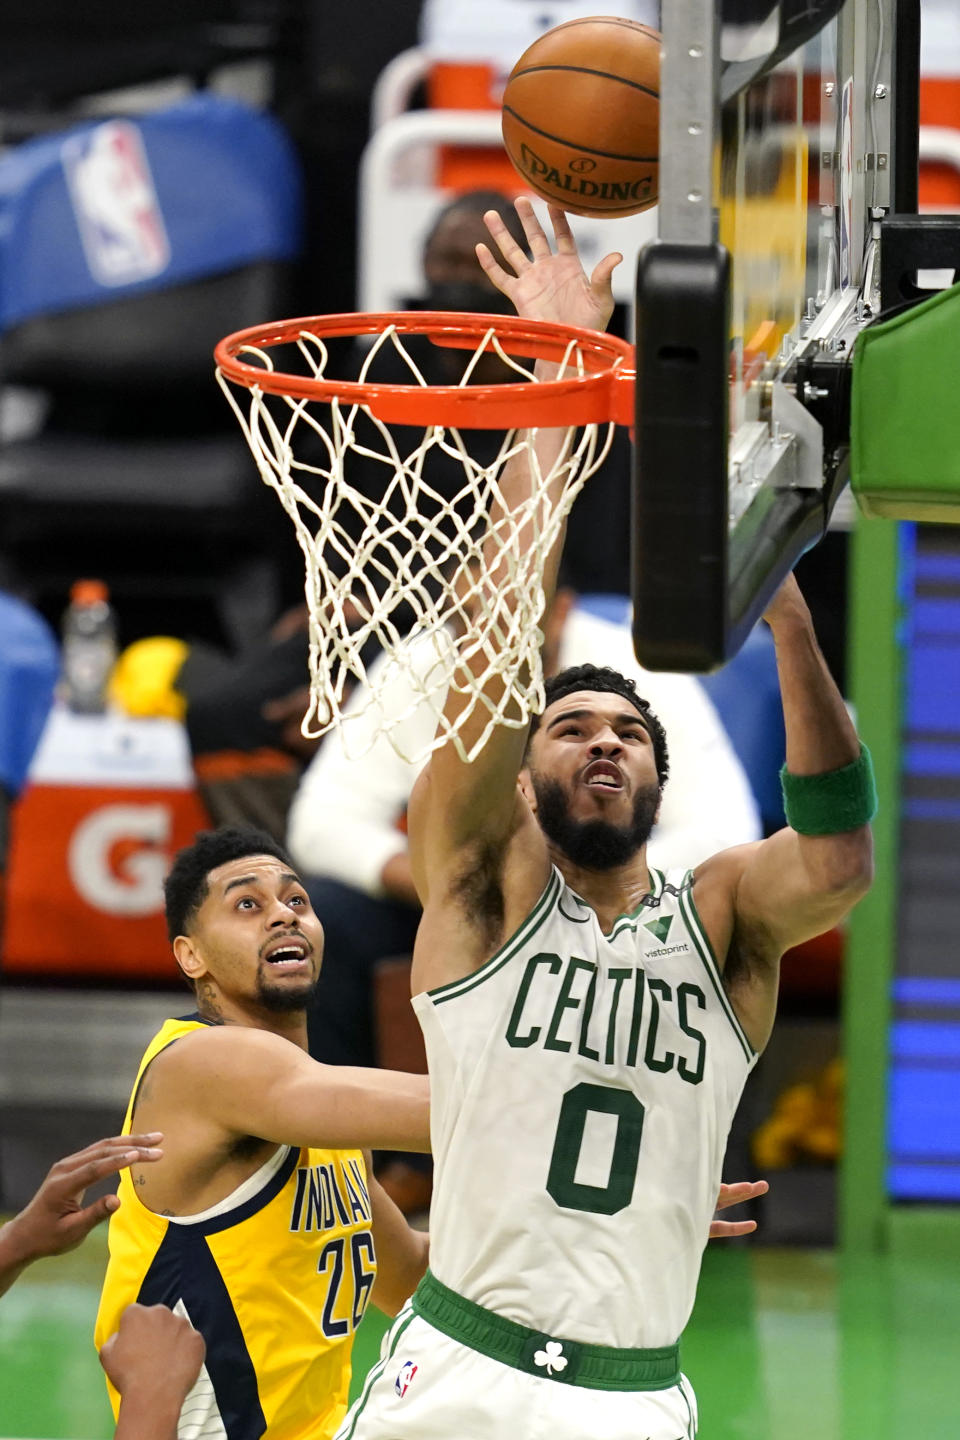 Boston Celtics forward Jayson Tatum (0) drives to the hoop past Indiana Pacers guard Jeremy Lamb (26) in the second half of an NBA basketball game, Friday, Feb. 26, 2021, in Boston. (AP Photo/Elise Amendola)